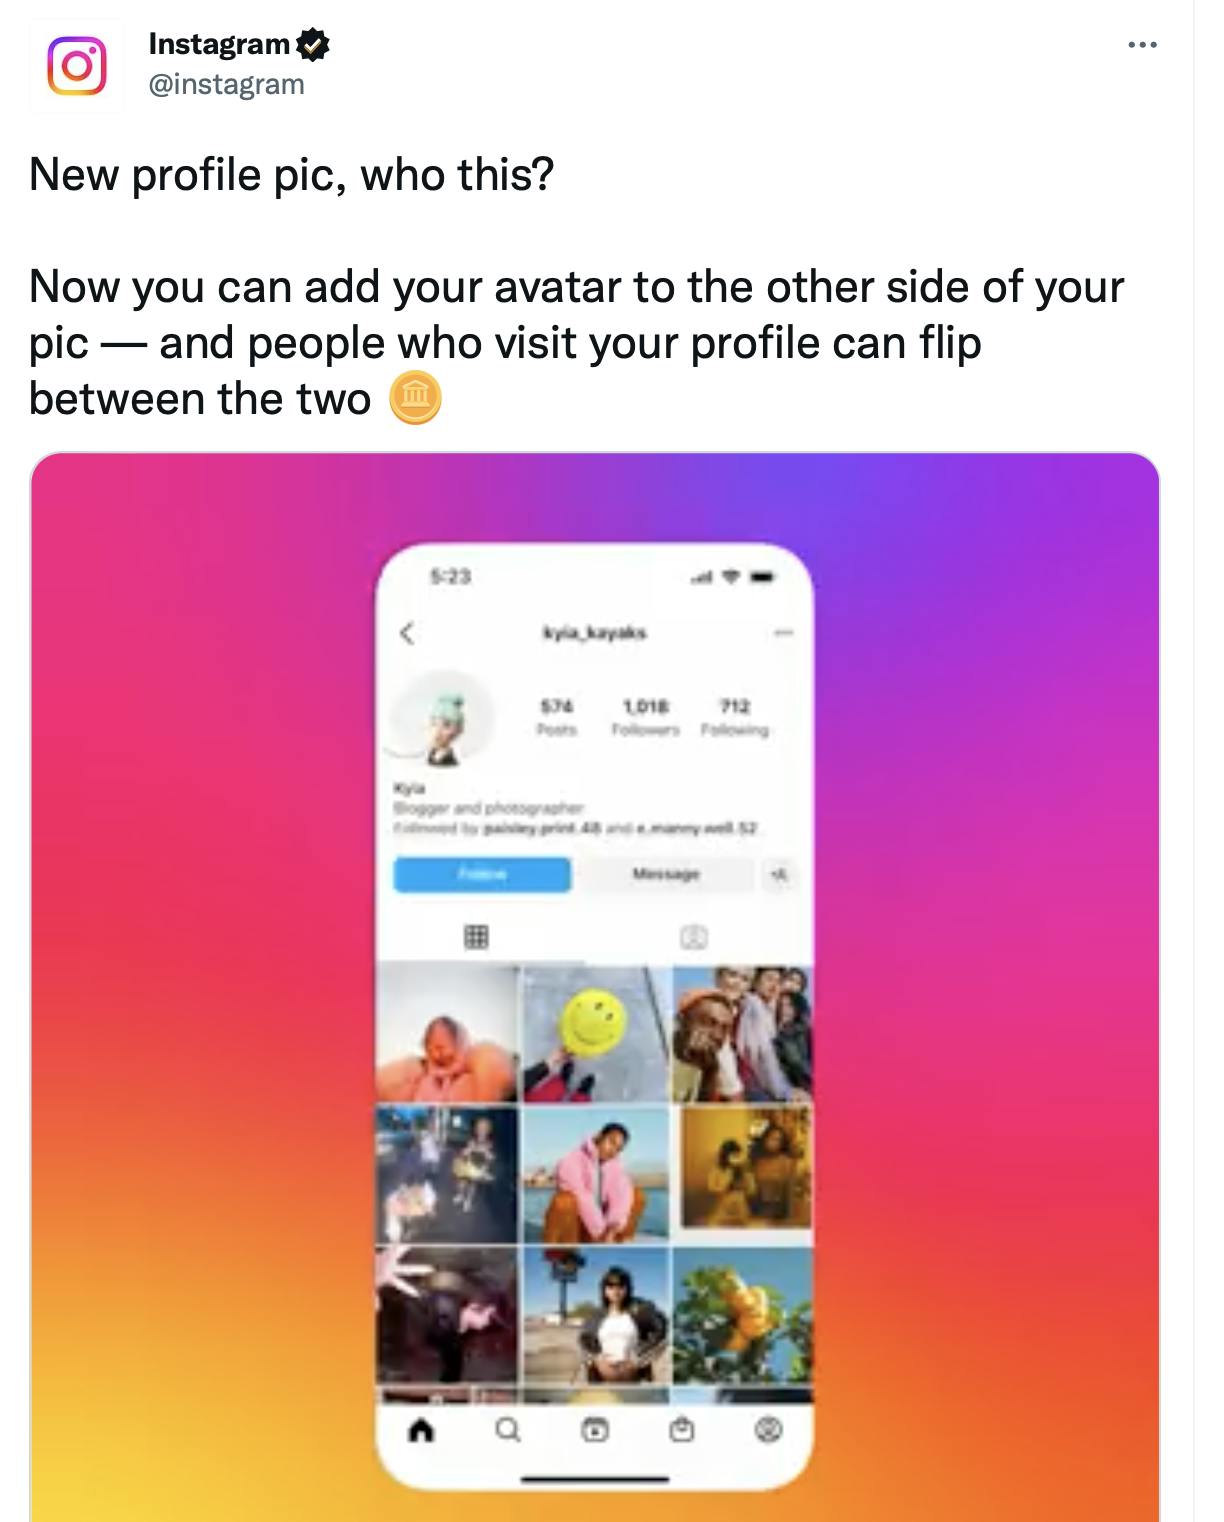 Instagram announced a new dynamic profile picture